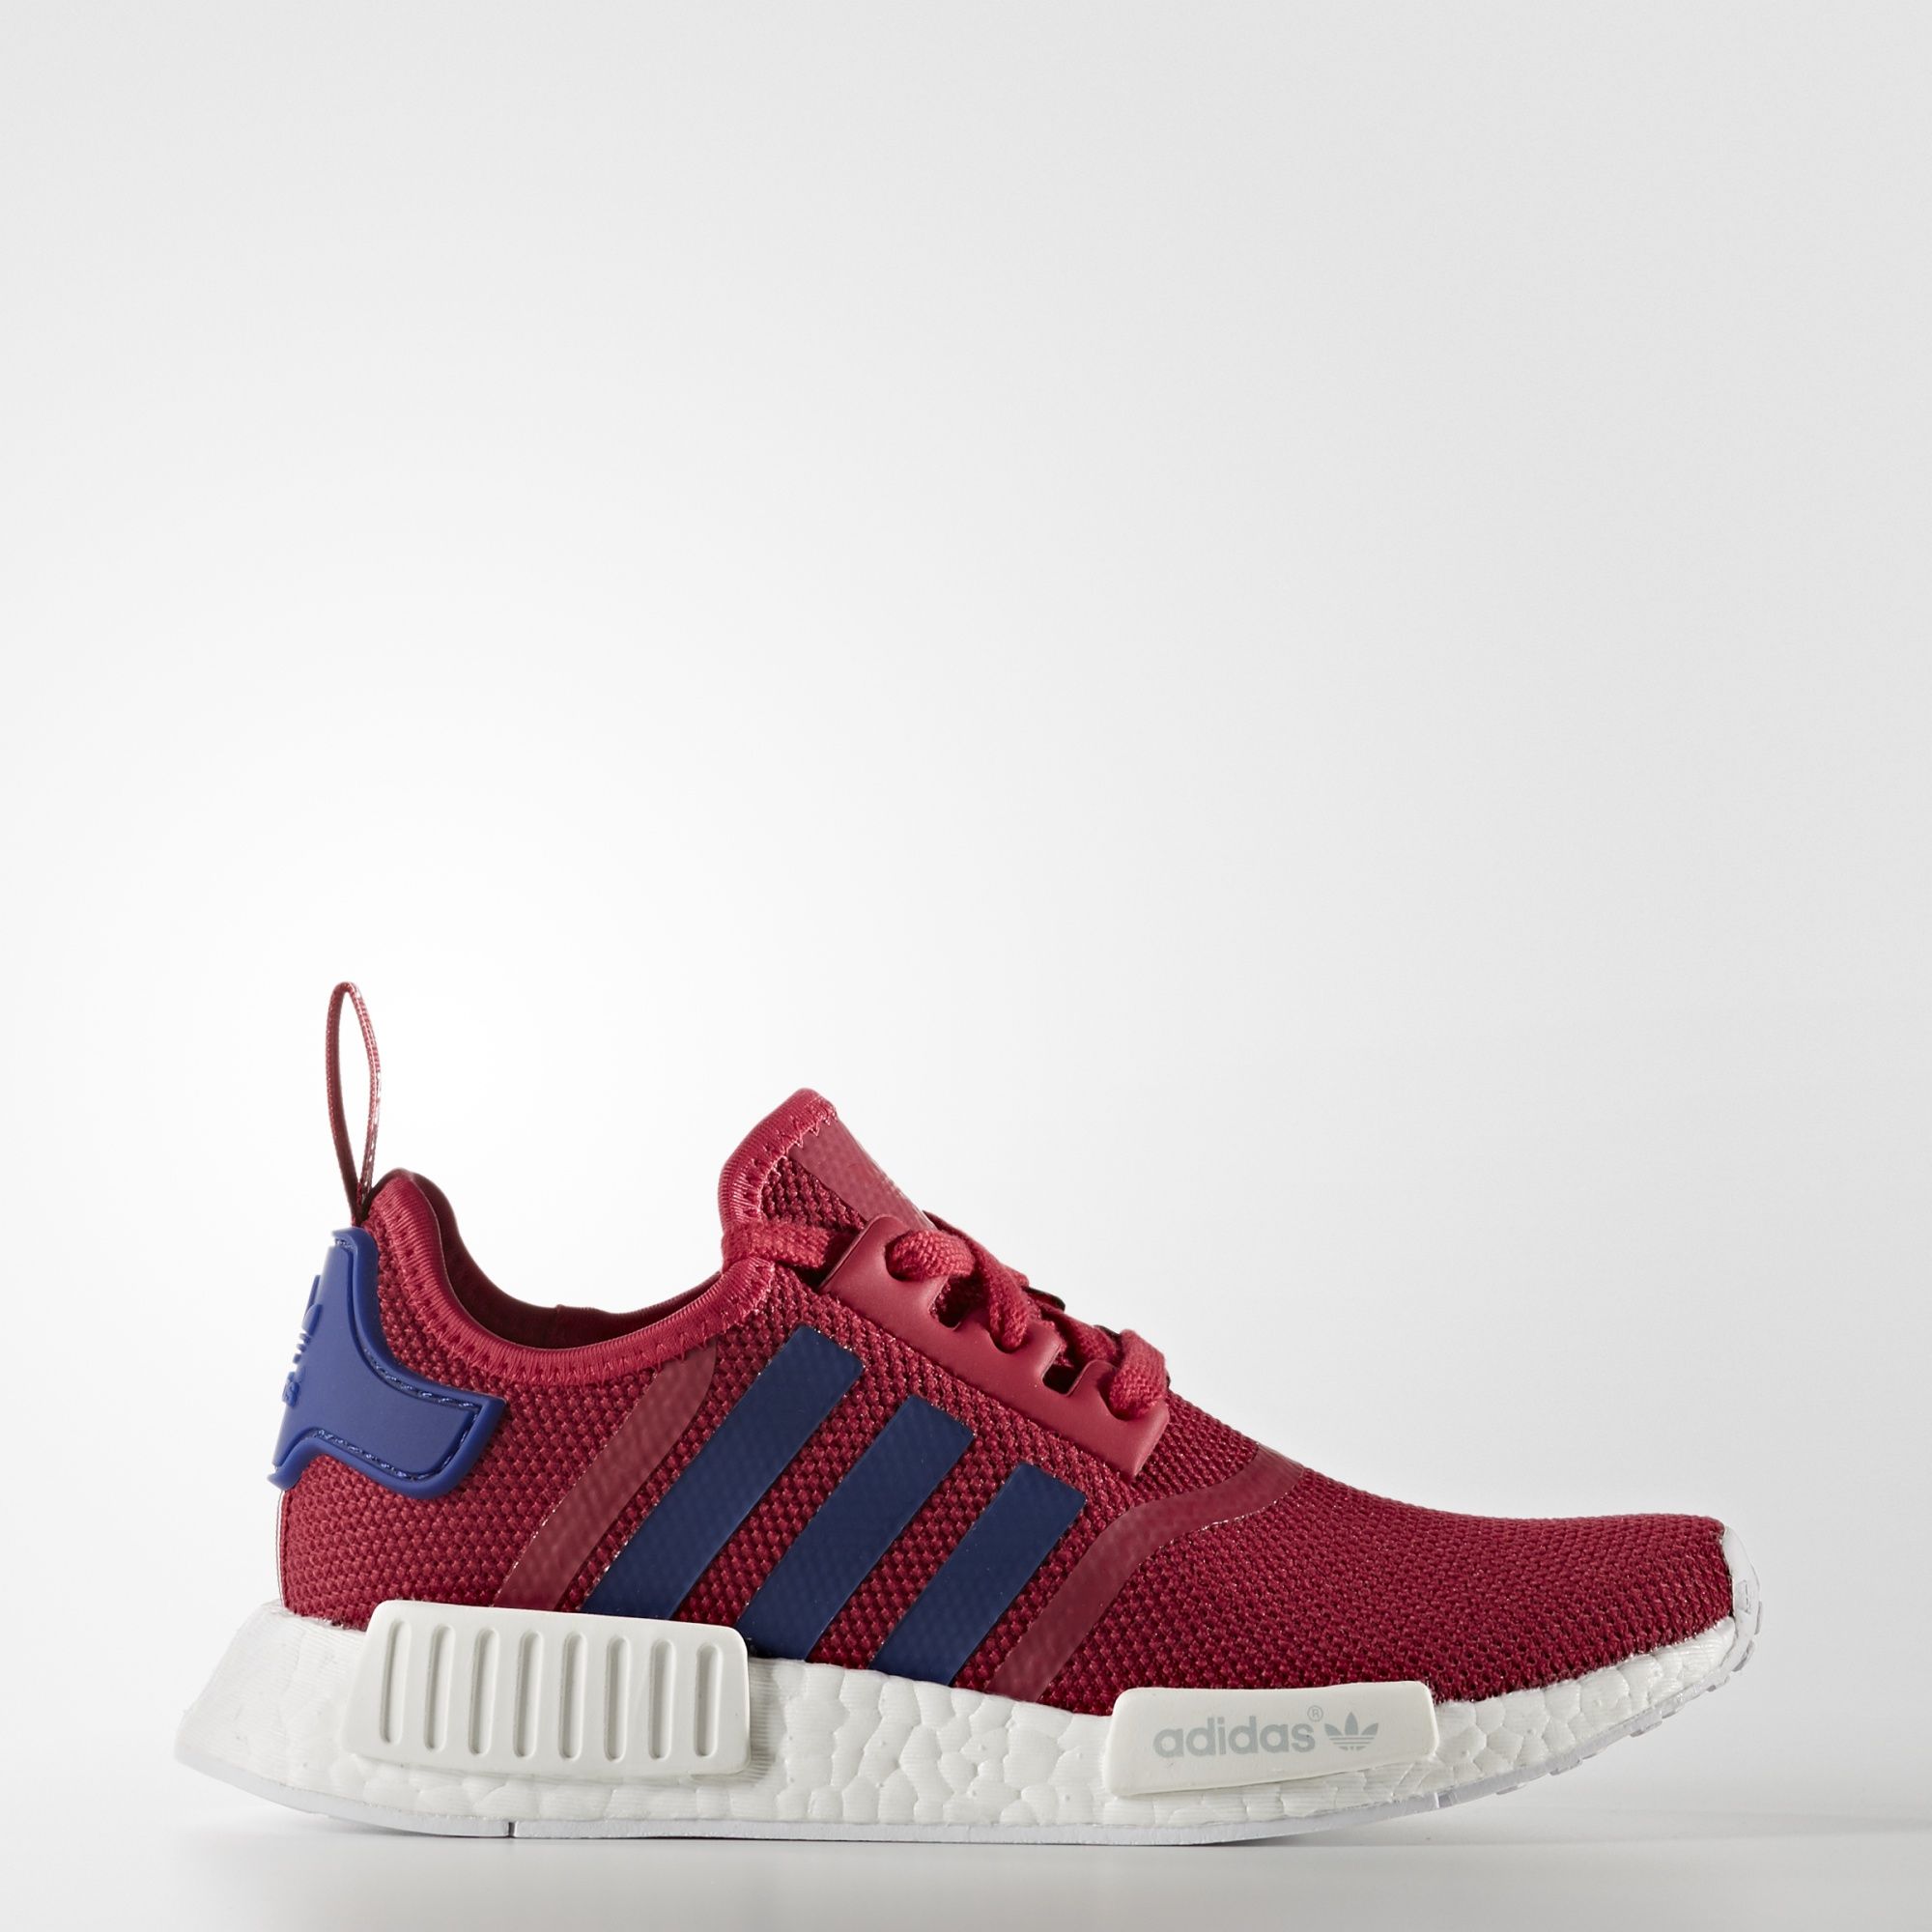 Sneaker Links: Adidas NMD R1 Online Shouts